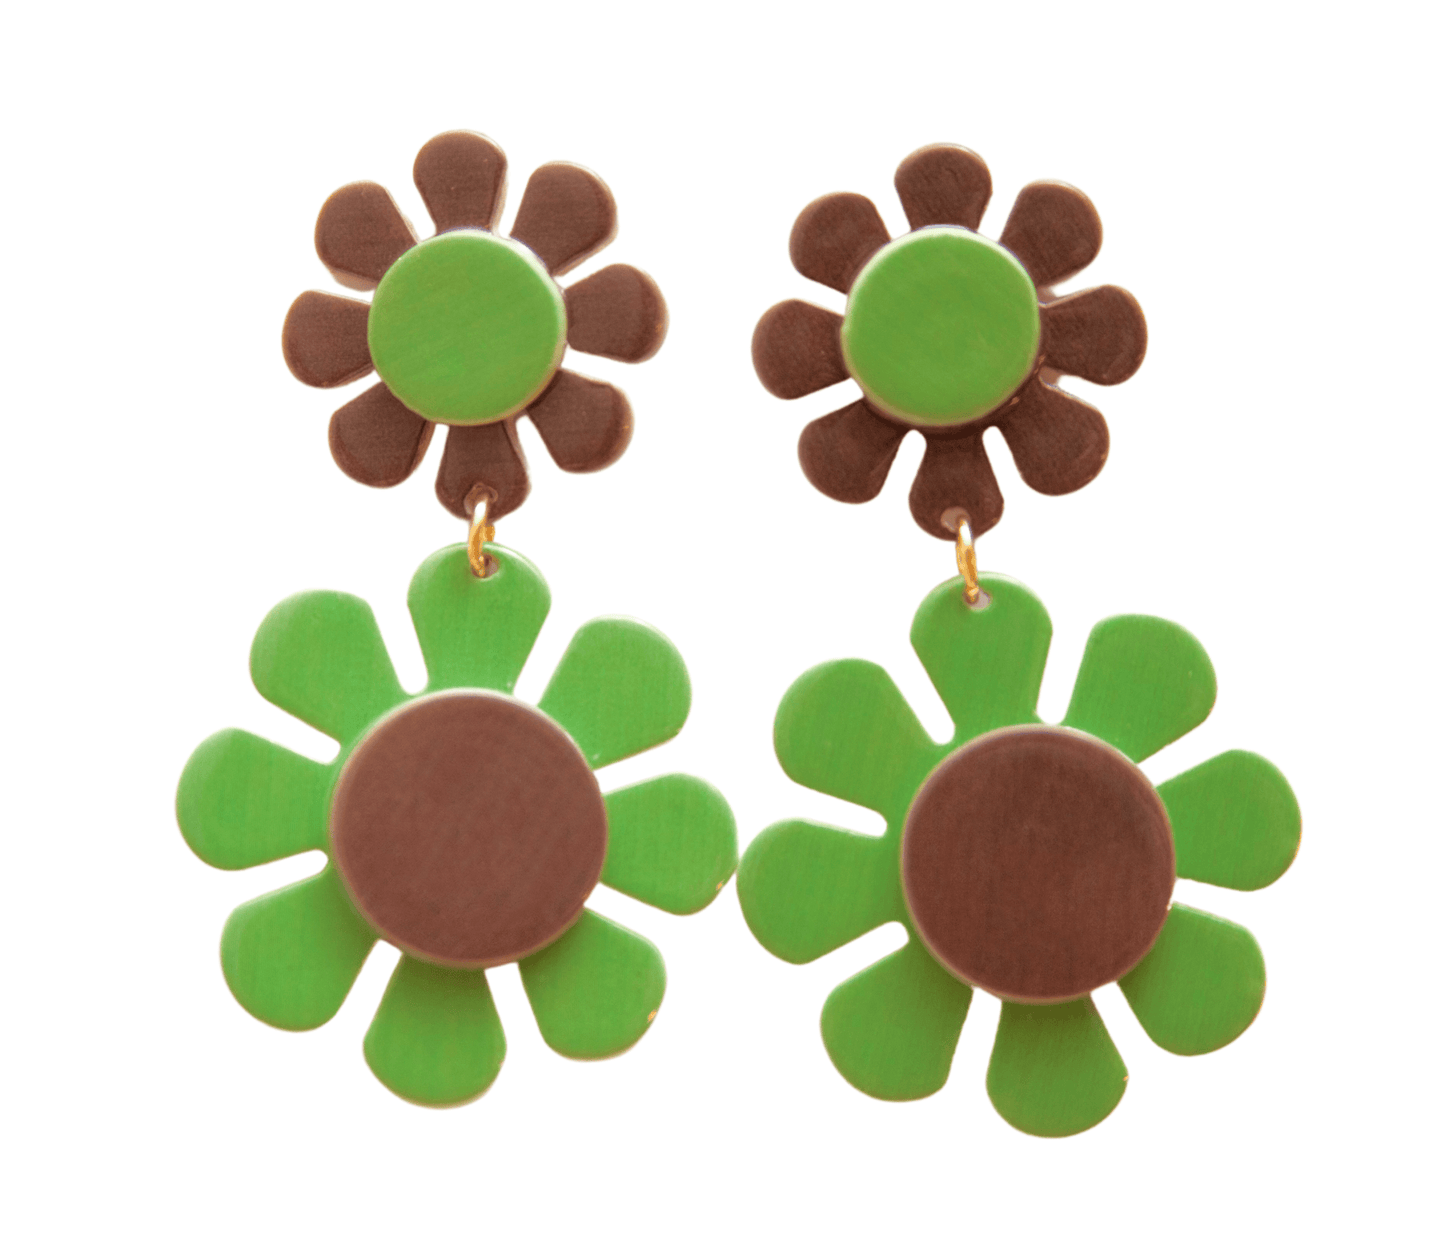 70s Olive Green and Chocolate Brown Flower Power Earrings Groovy Girl - Relic828